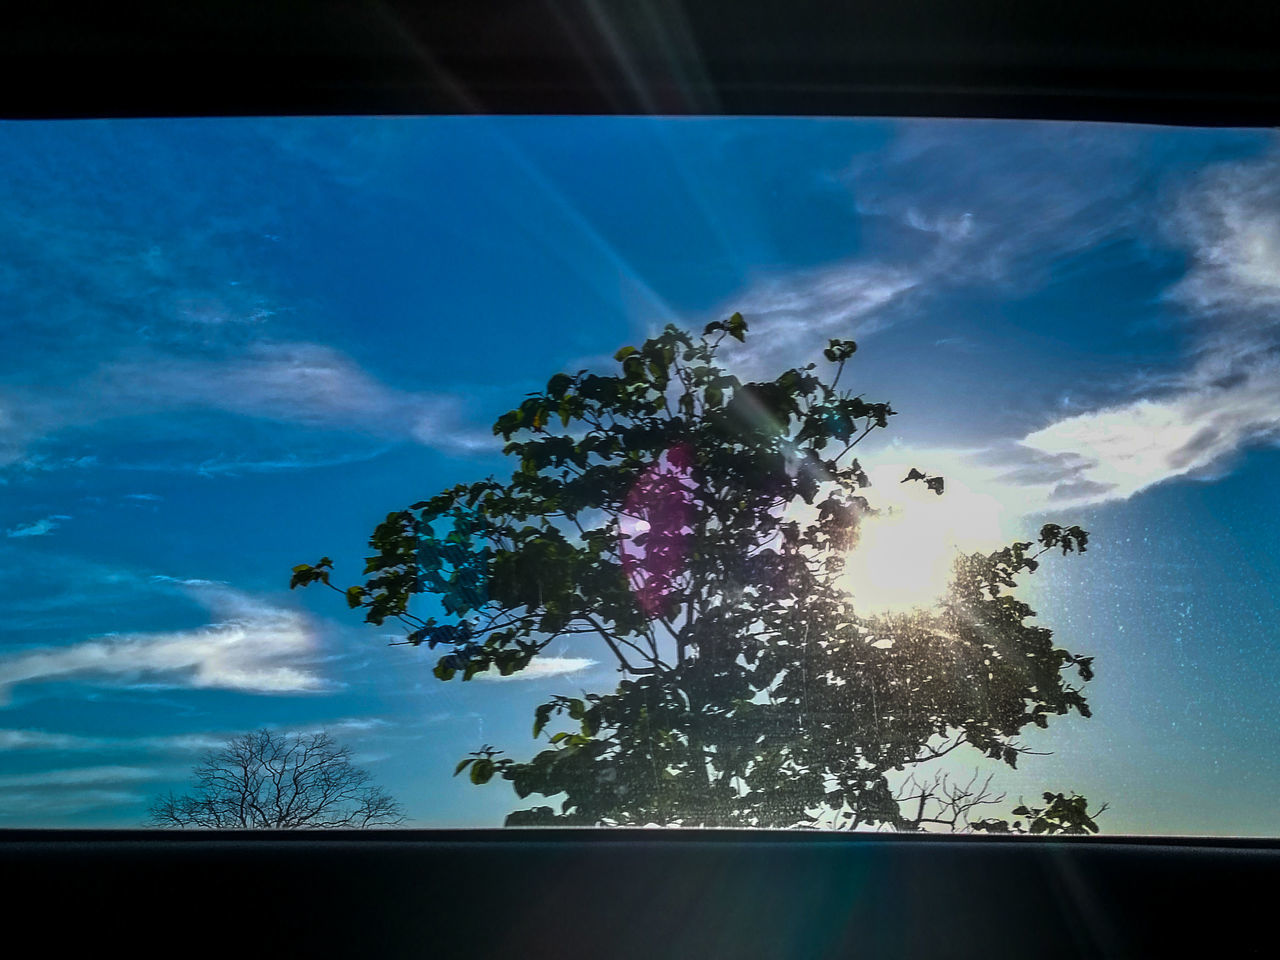 sky, cloud - sky, tree, plant, nature, sunbeam, sunlight, no people, blue, low angle view, beauty in nature, lens flare, sun, glass - material, day, transparent, outdoors, car, growth, tranquility, bright